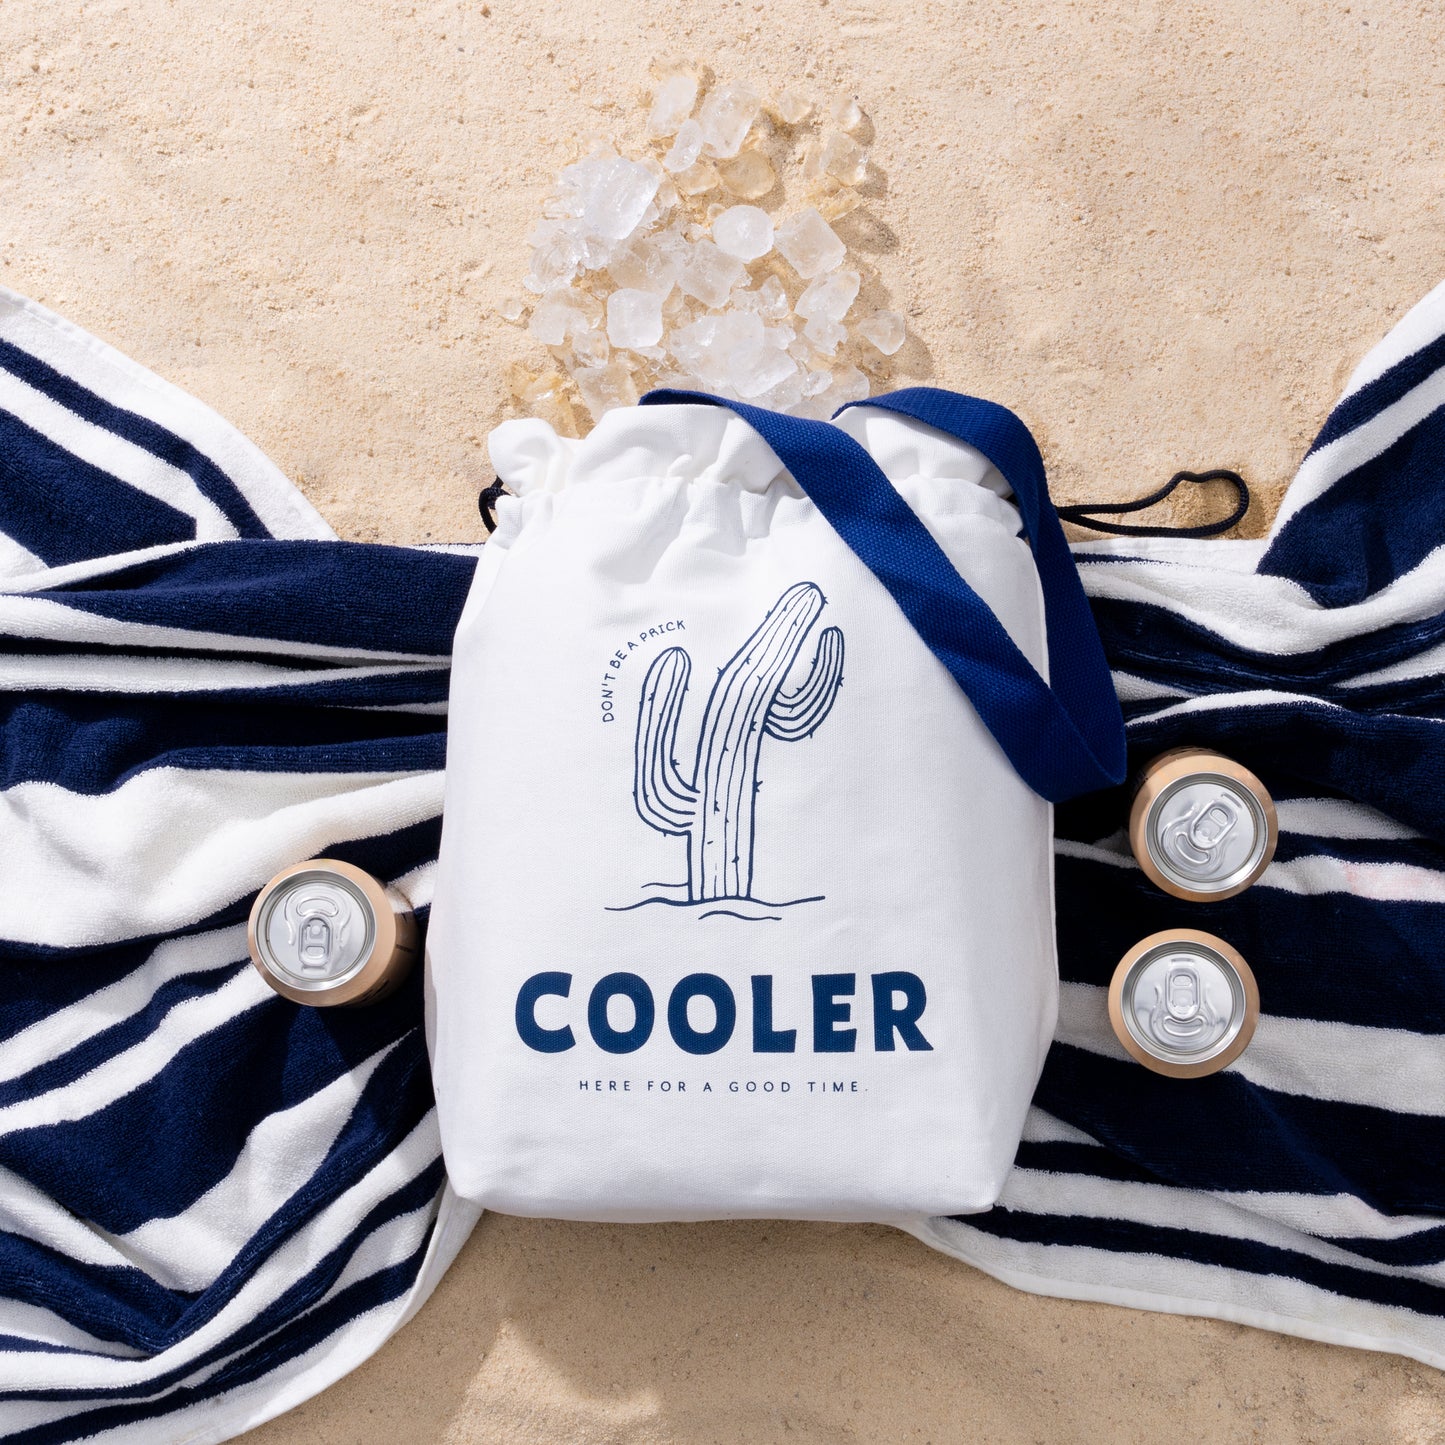 Don't Be A Prick Cooler - Coolers and Insulated Bags